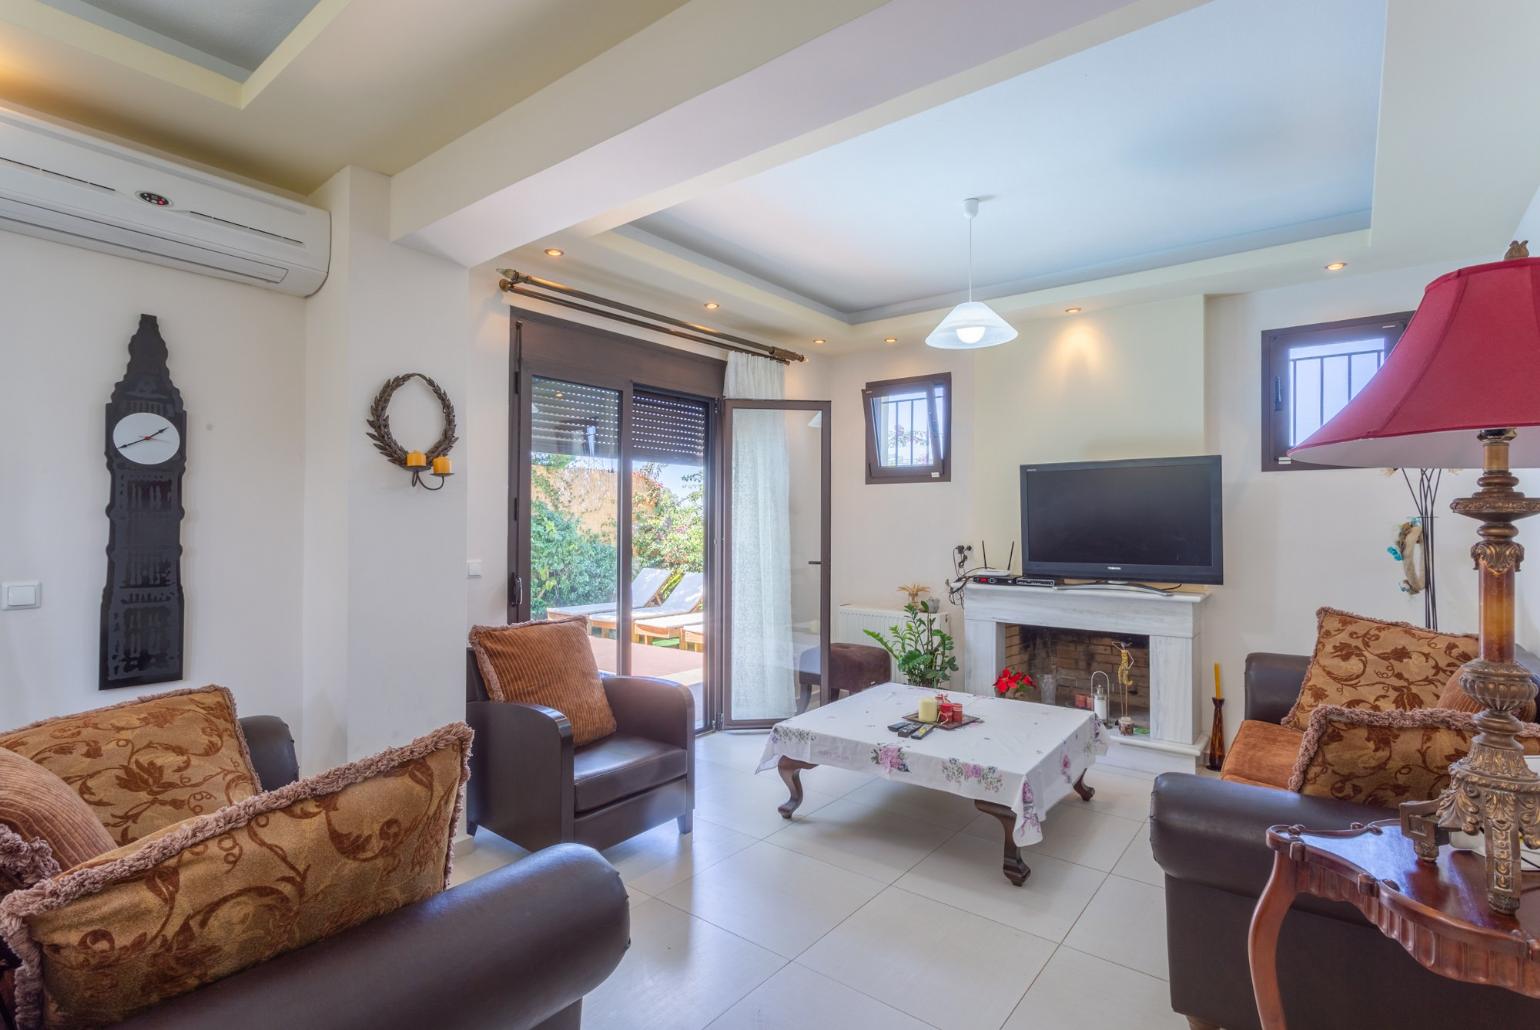 Open-plan living room with dining area, kitchen, A/C, WiFi Internet, Satellite TV, and pool terrace access